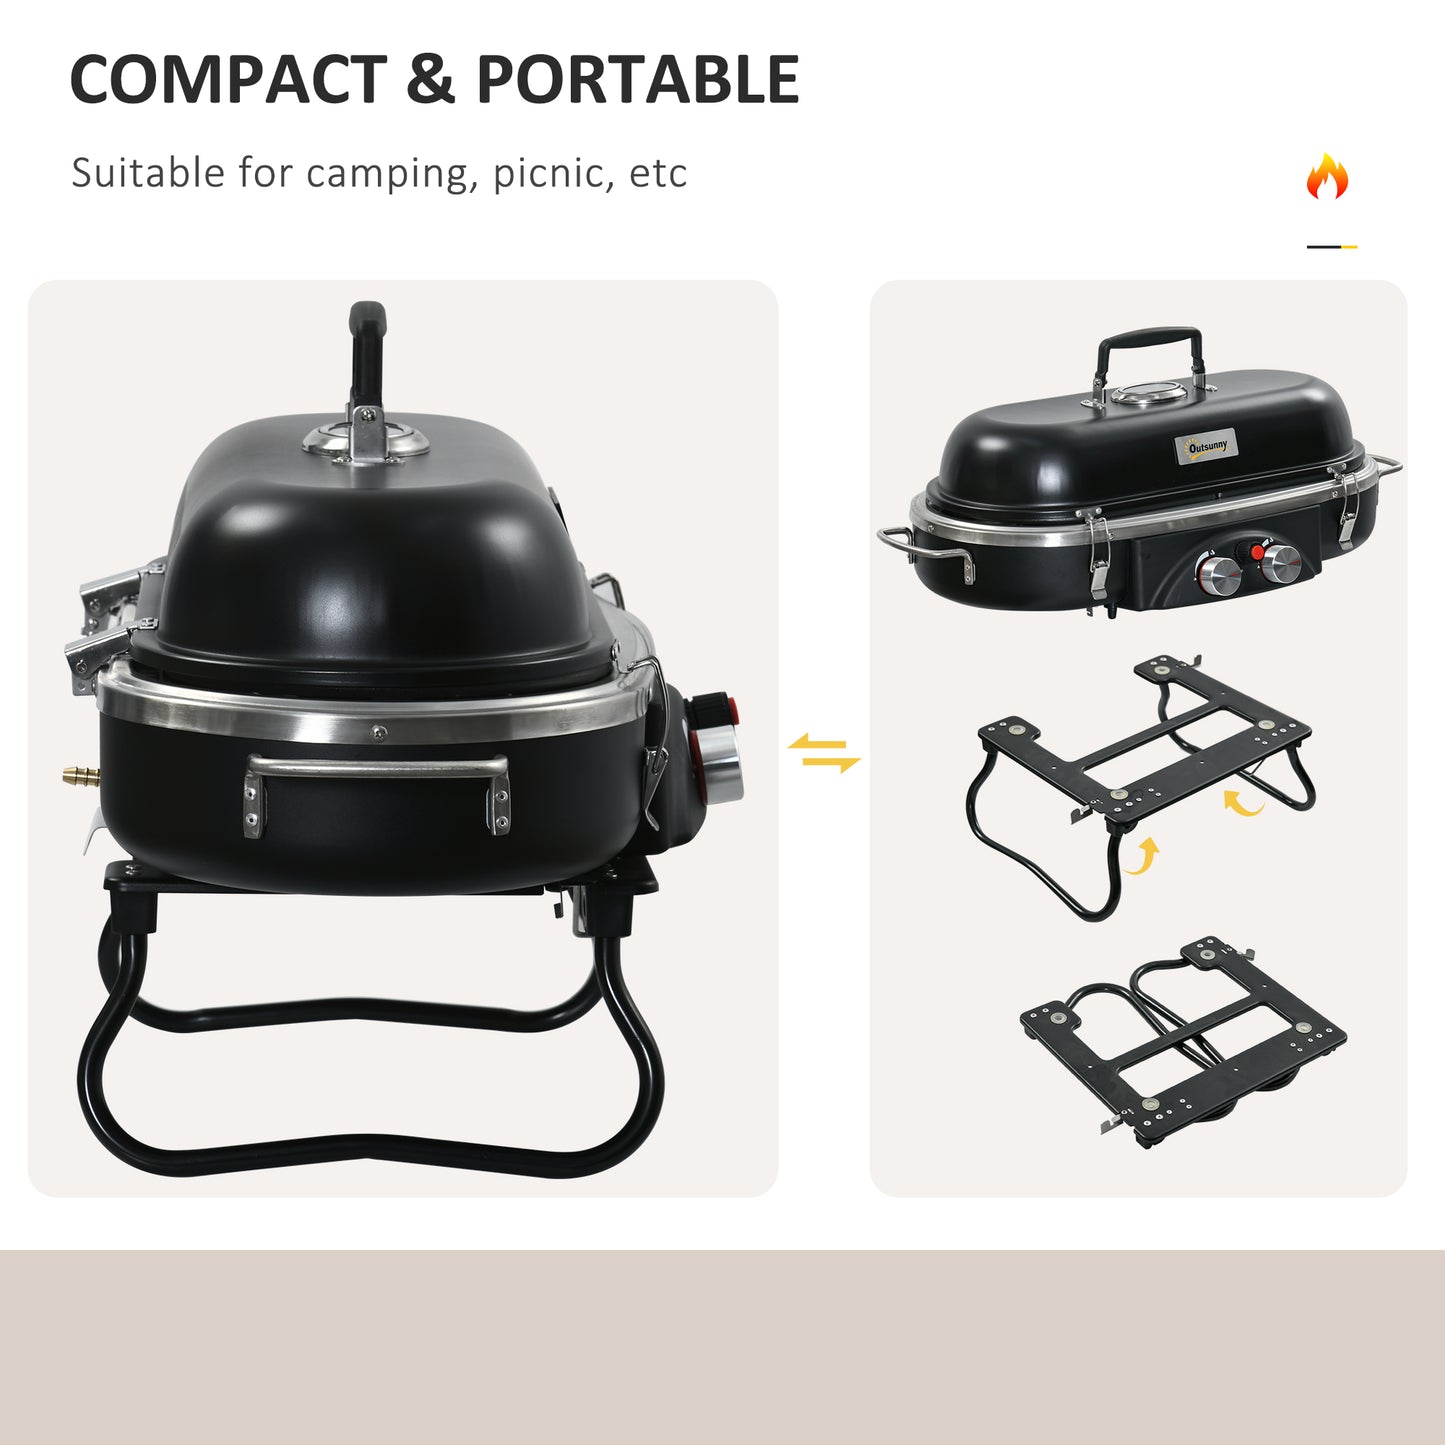 Outsunny Foldable Gas BBQ Grill 2 Burner Table Top Barbecue w/ Lid Piezo Ignition Thermometer for Camping Picnic Cooking, Aluminium Alloy